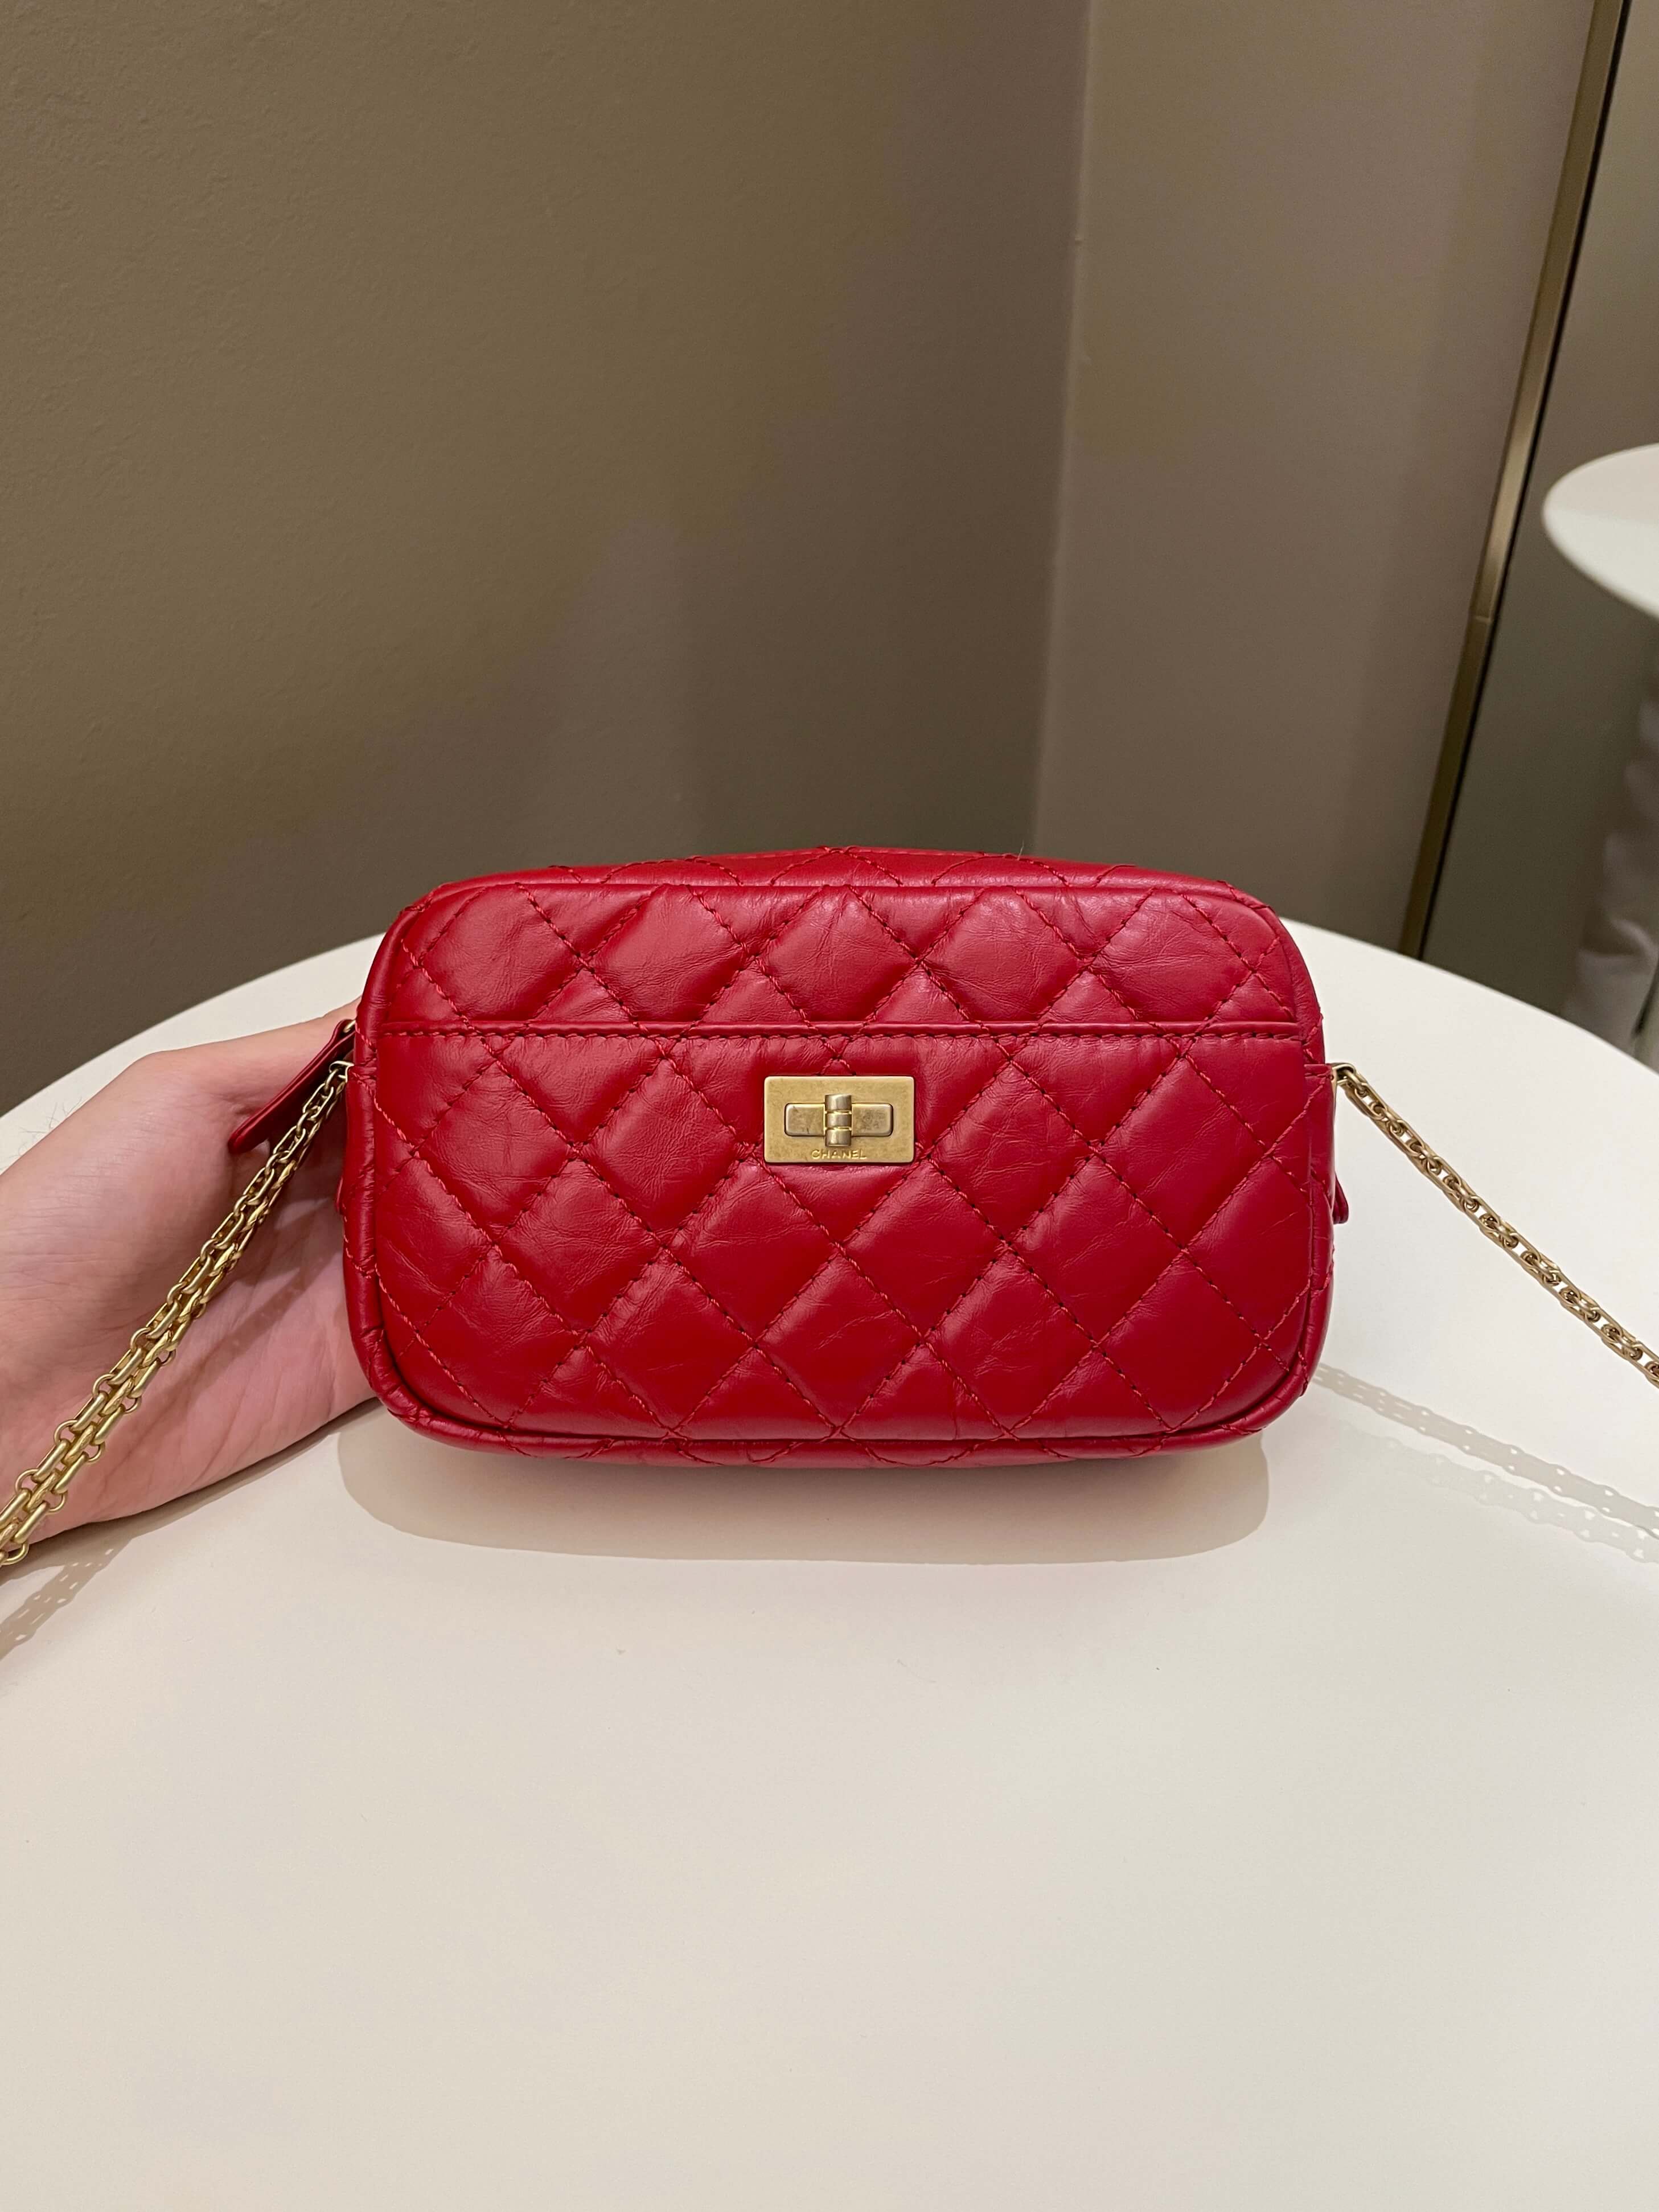 Chanel 2.55 Mini Reissue review